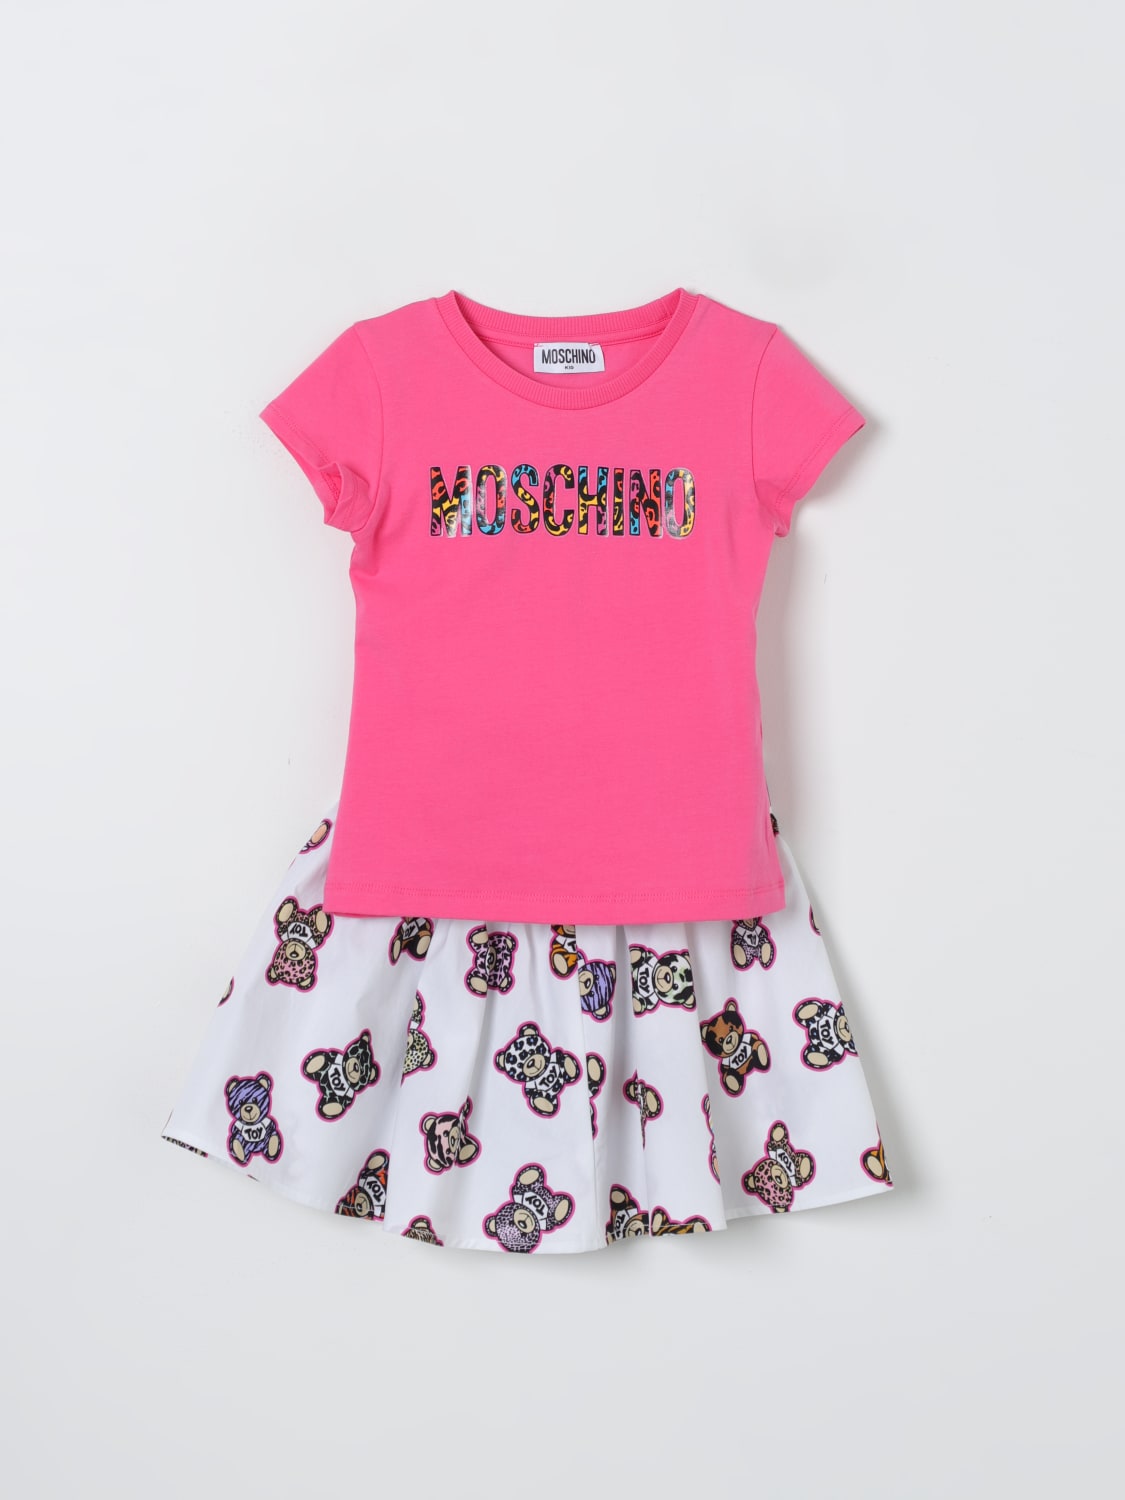 MOSCHINO KID: Co-ords kids - Multicolor  MOSCHINO KID co-ords HDG010LLB34  online at